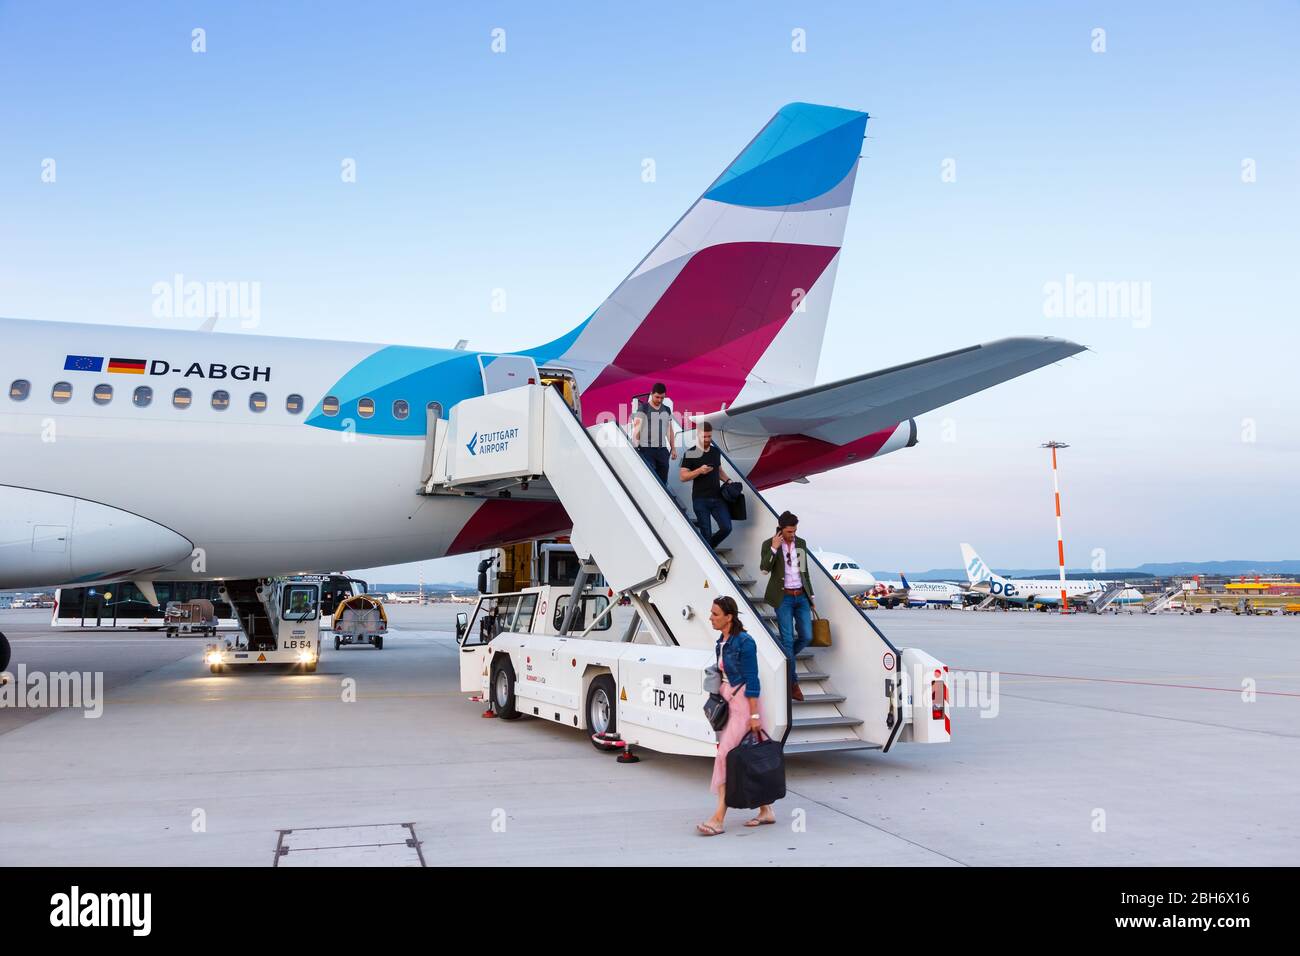 Stuttgart, Germany – July 10, 2019: Eurowings Airbus A319 airplane at Stuttgart airport (STR) in Germany. Stock Photo